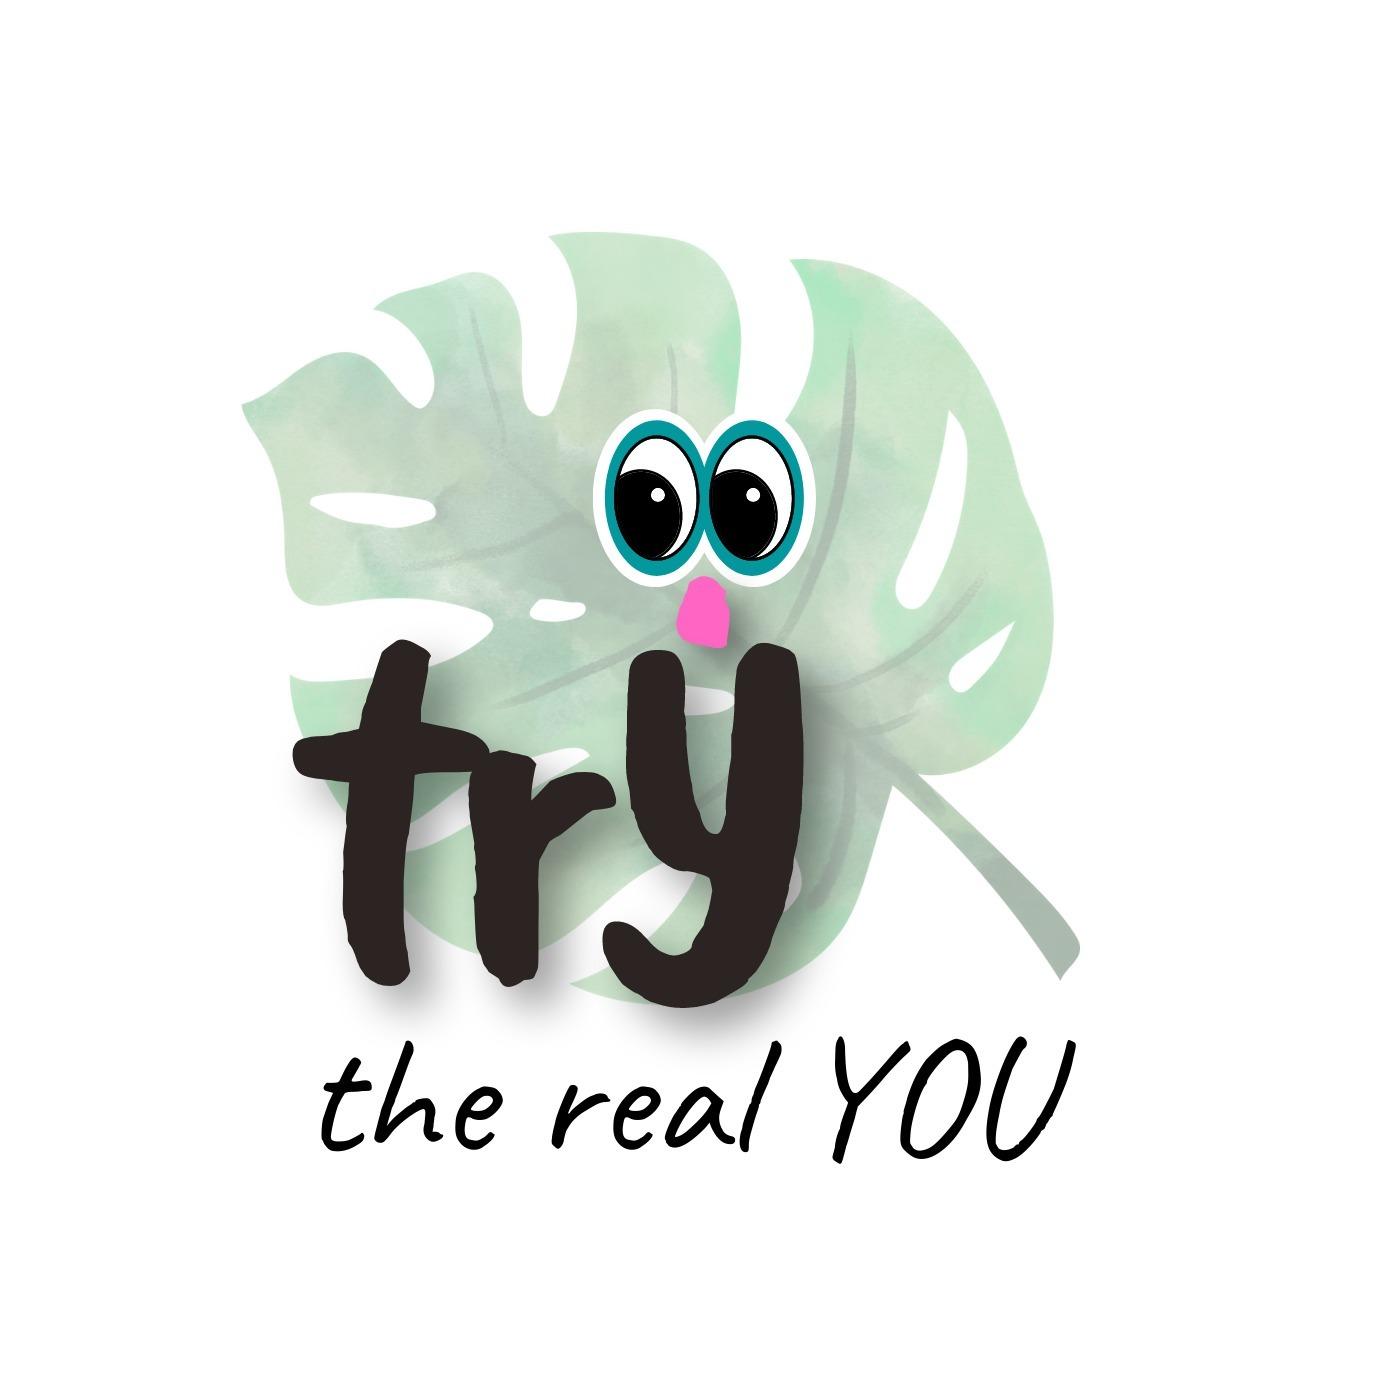 trY (the real YOU)